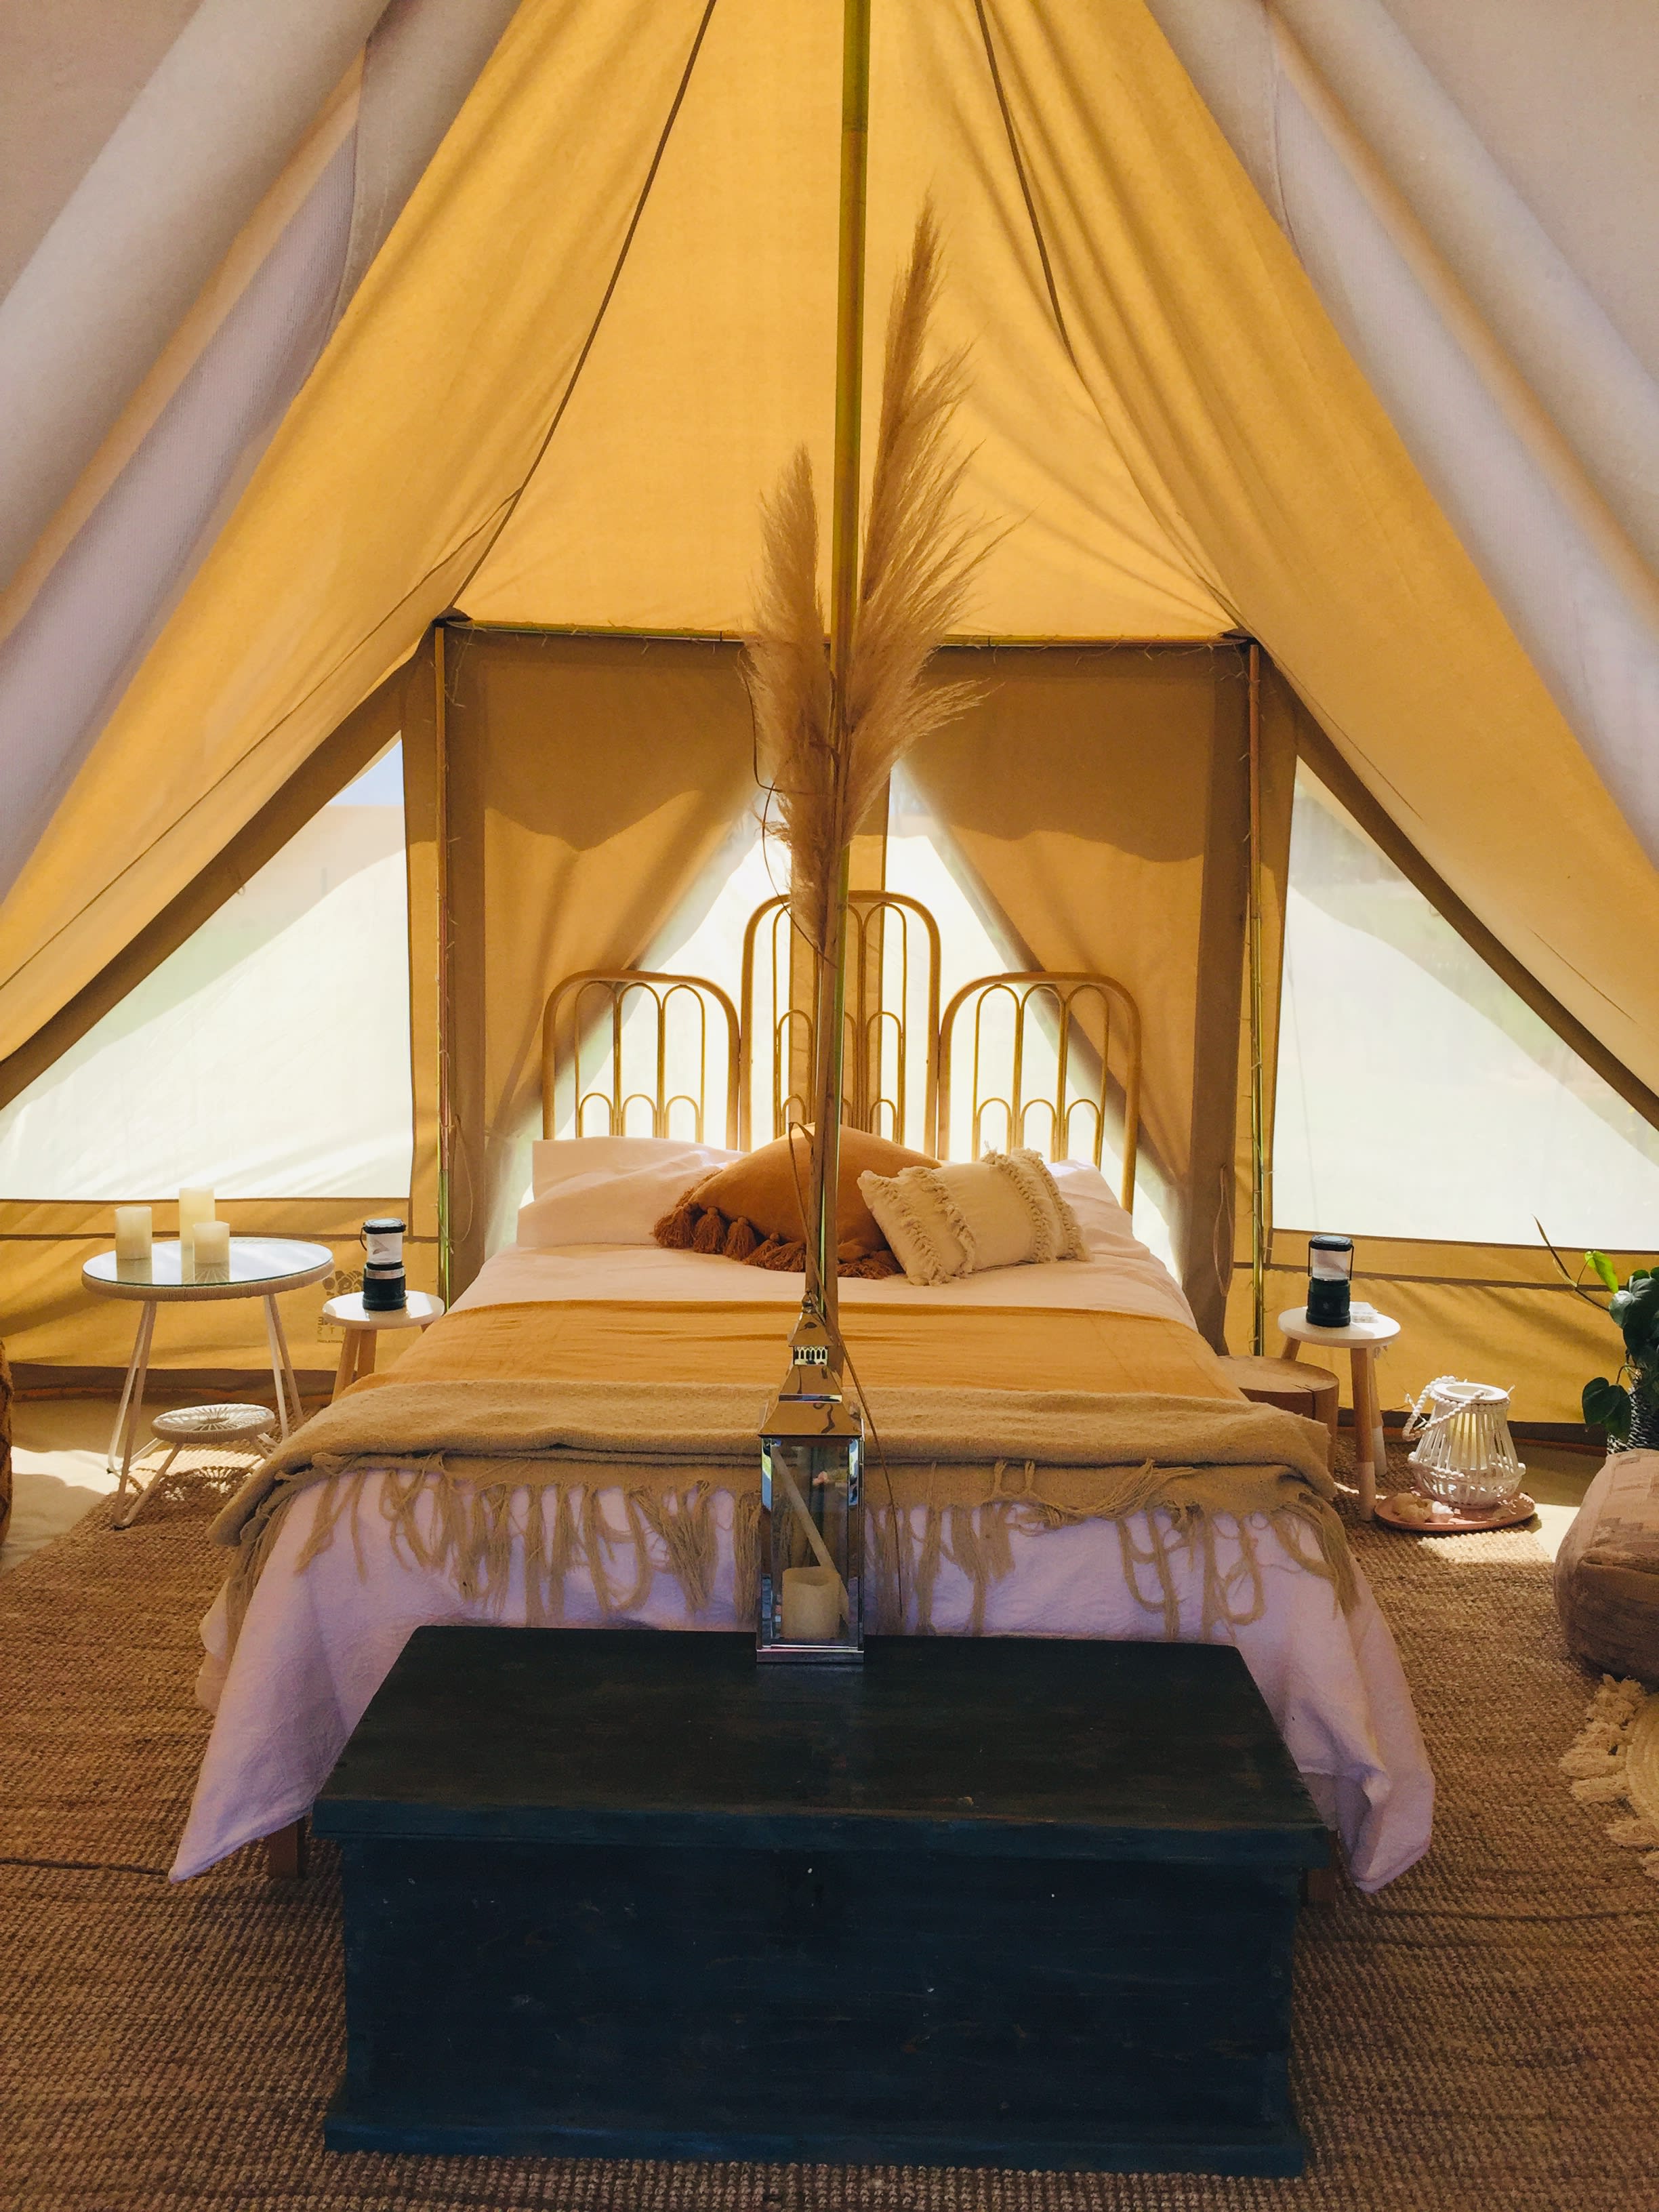 "Dragonfly" Glamping Tent